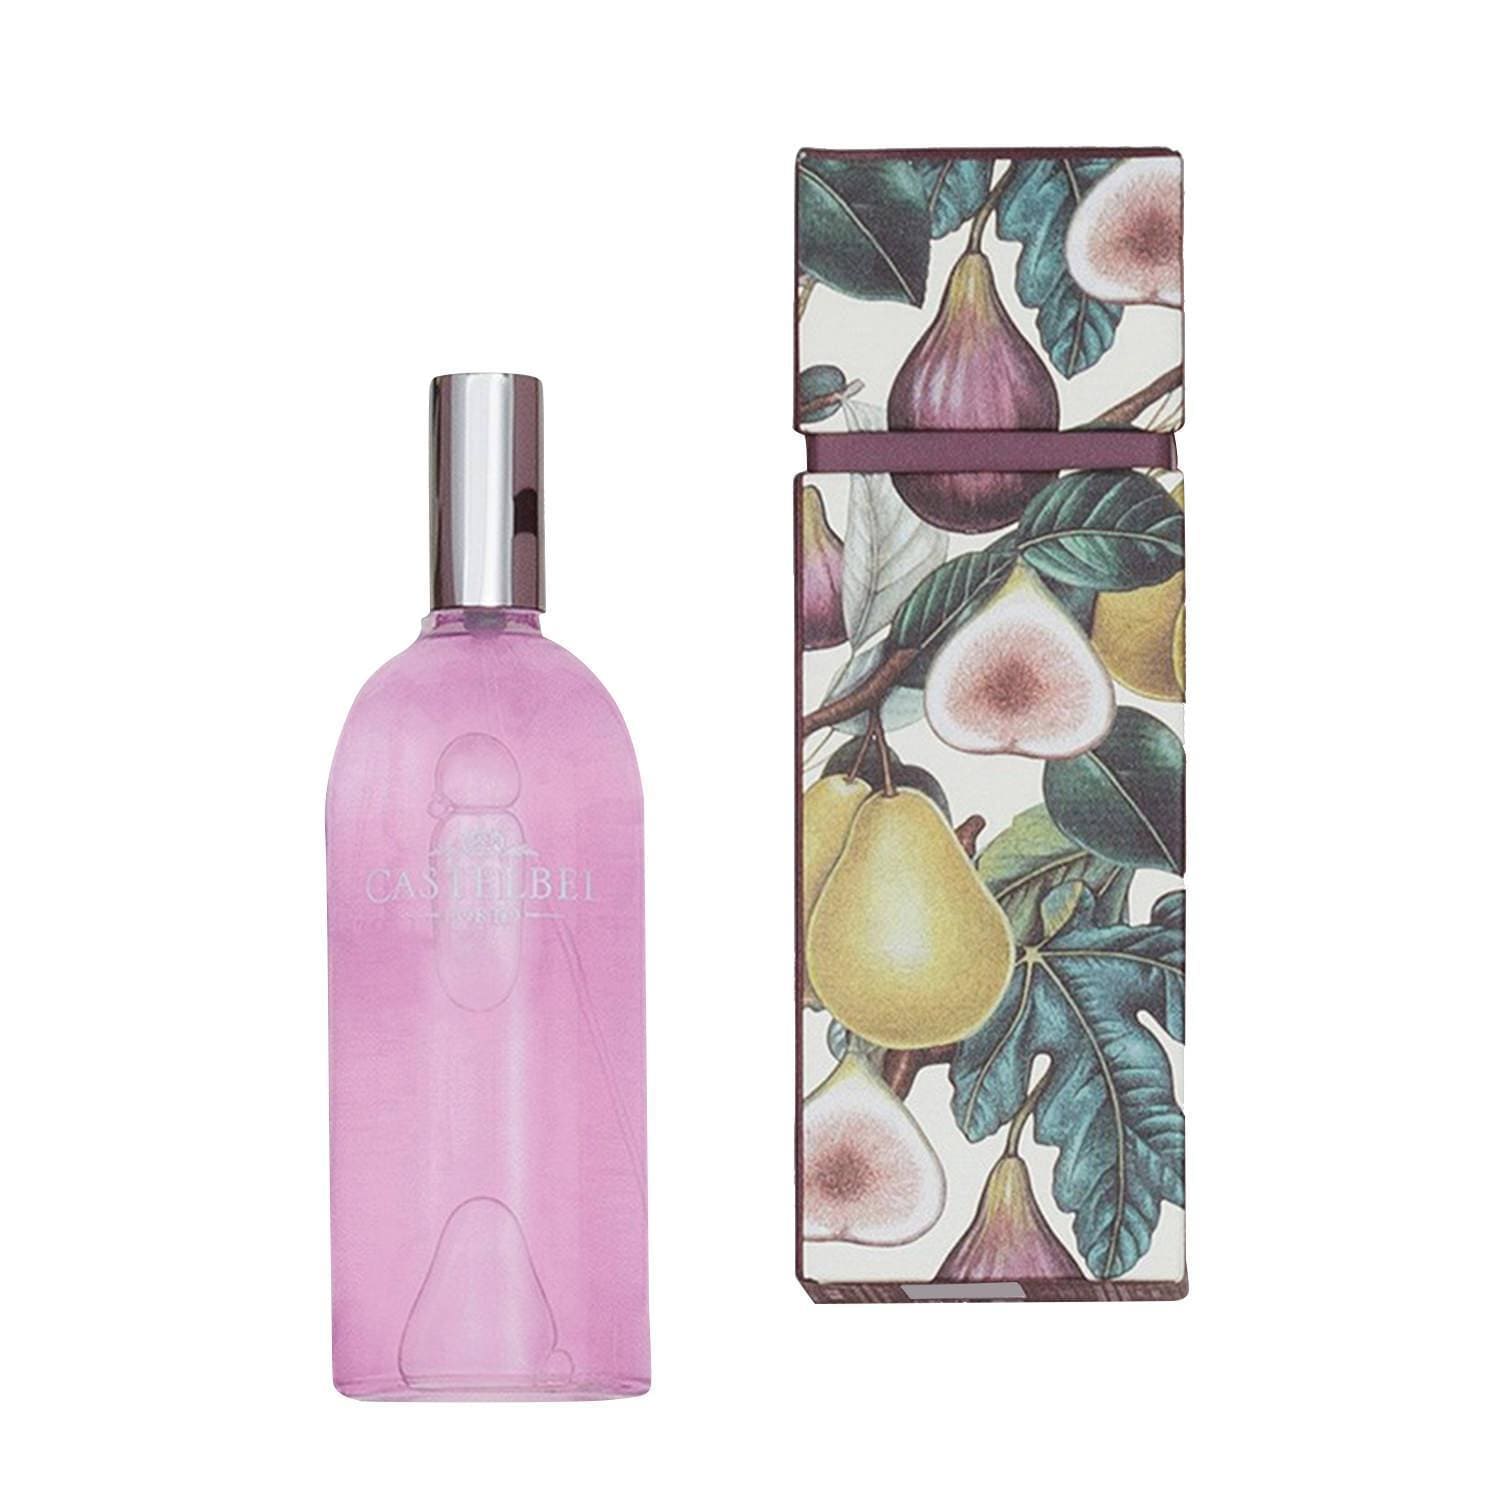 Castelbel Amber Fig and Pear Room Spray - 100ml - C1-0303 - Jashanmal Home